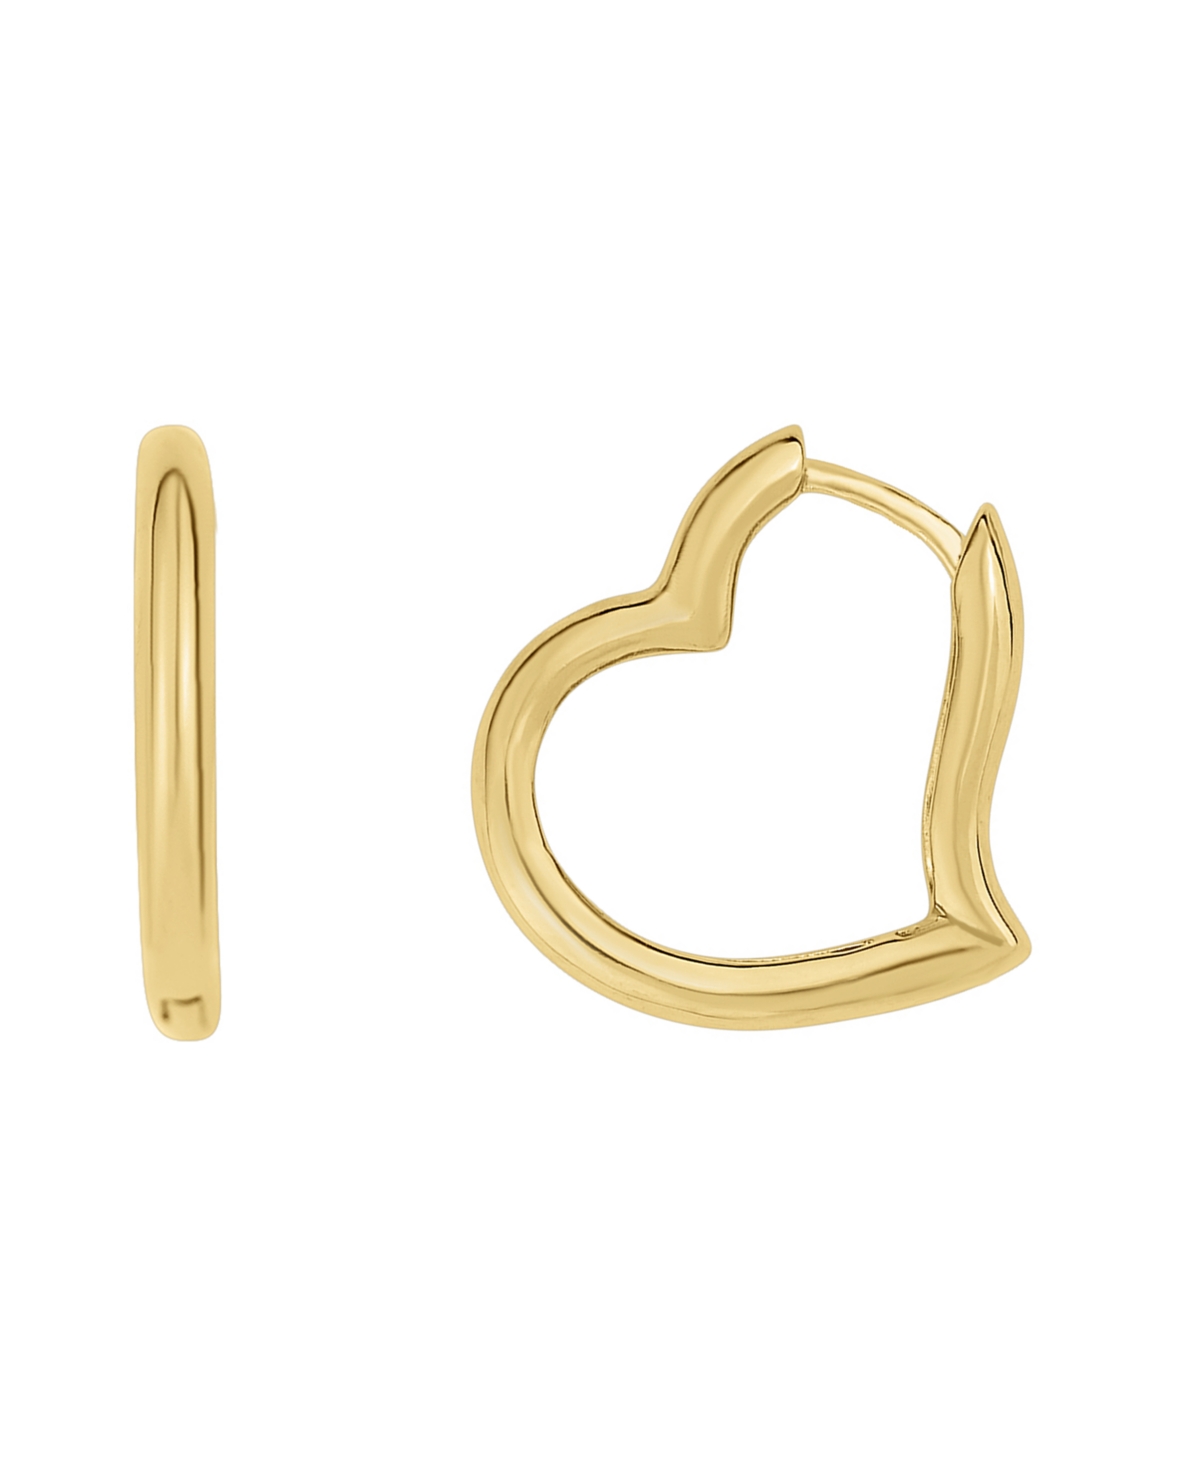 And Now This 18k Gold Plated Heart Hoop Earring In K Gold Plated Over Brass